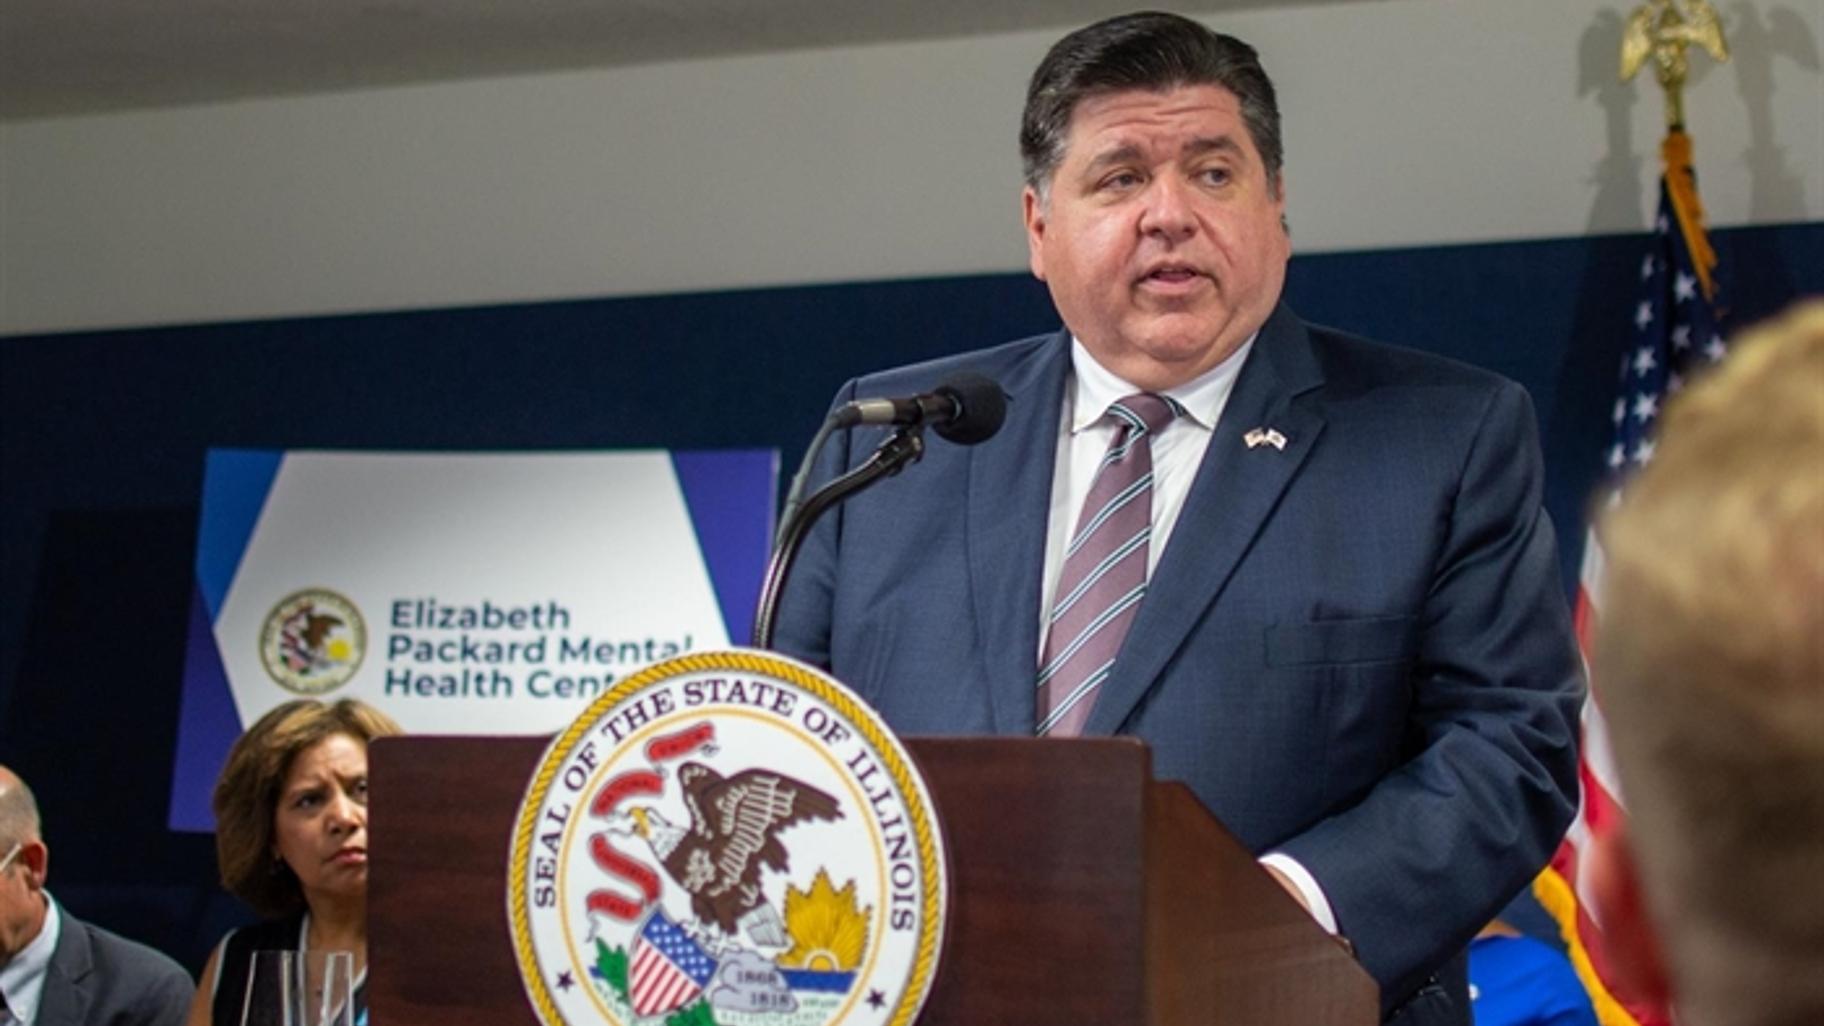 Gov. J.B. Pritzker speaks at a news conference in Springfield on Wednesday before signing an order to rename McFarland Mental Health Center after Elizabeth Packard, a woman who was committed into an Illinois asylum against her will in 1860. (Capitol News Illinois)